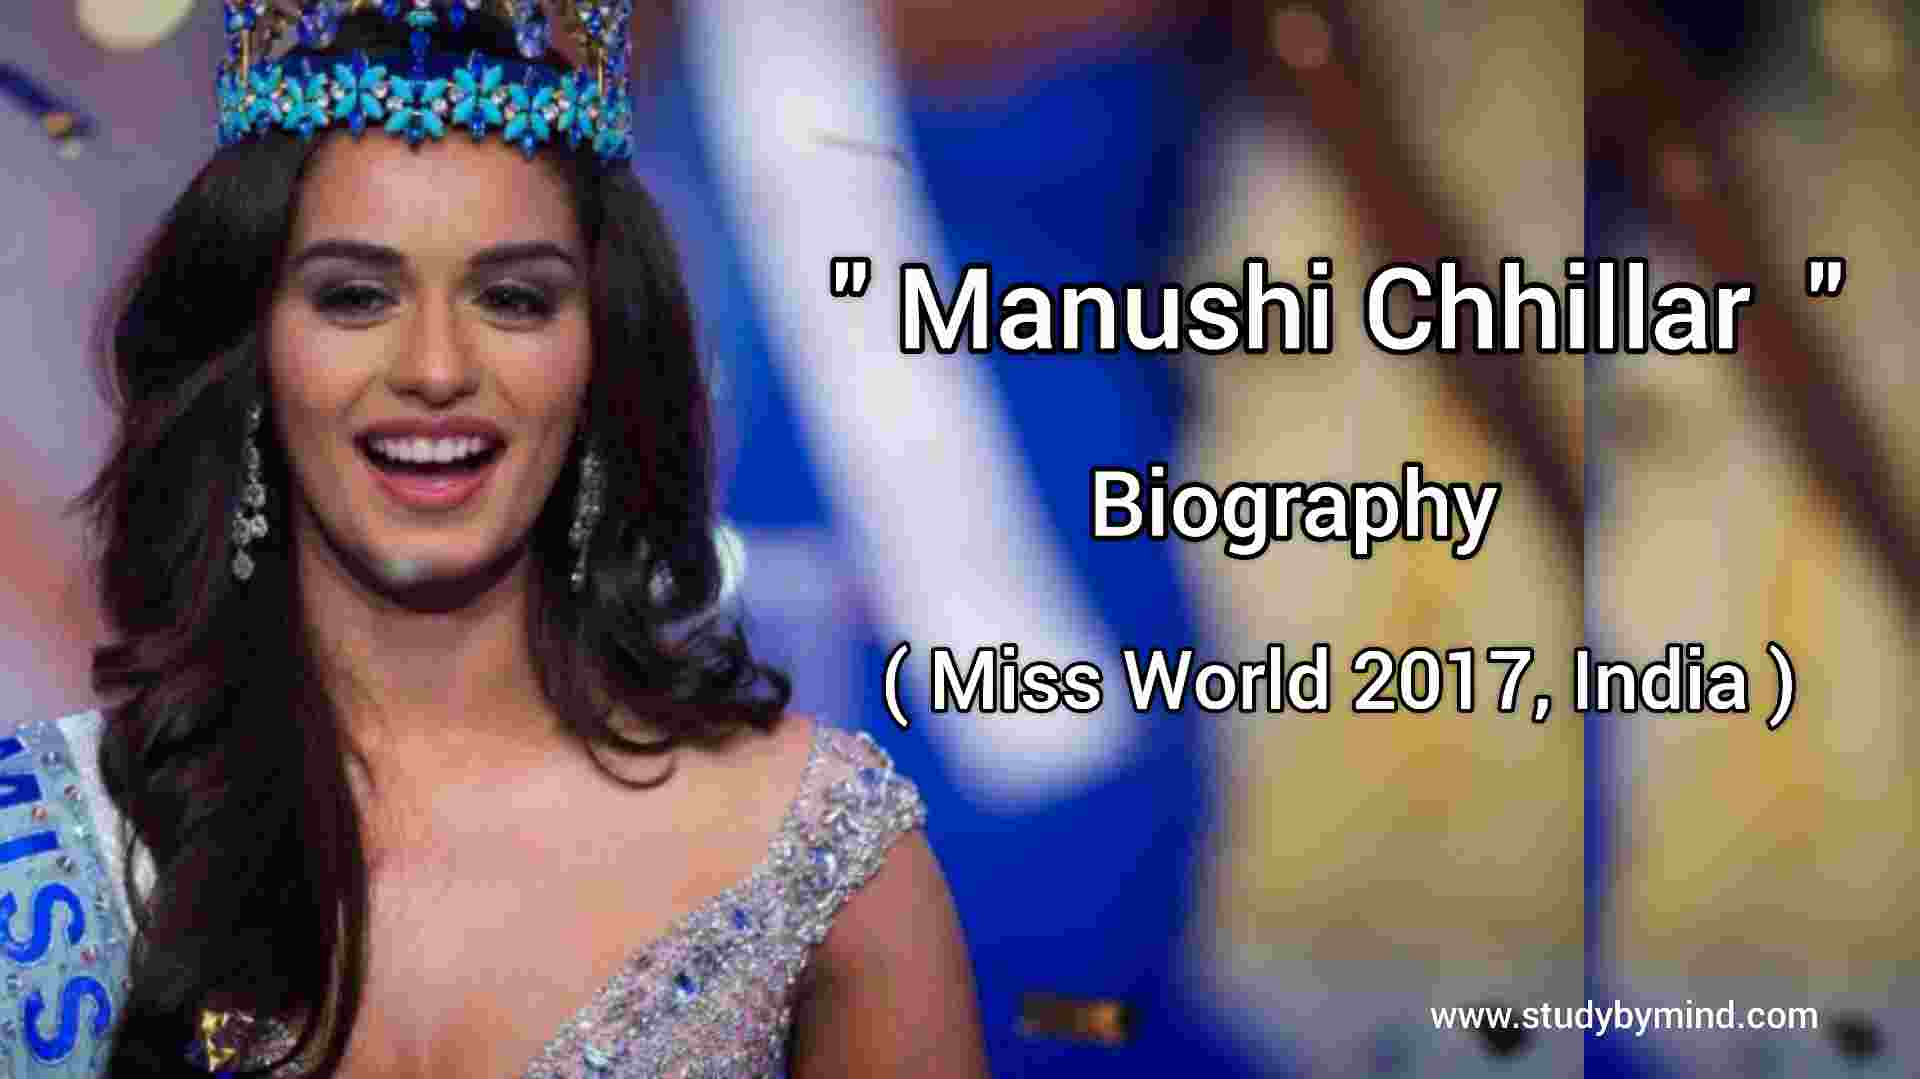 You are currently viewing Manushi Chillar Biography (Miss World 2017)